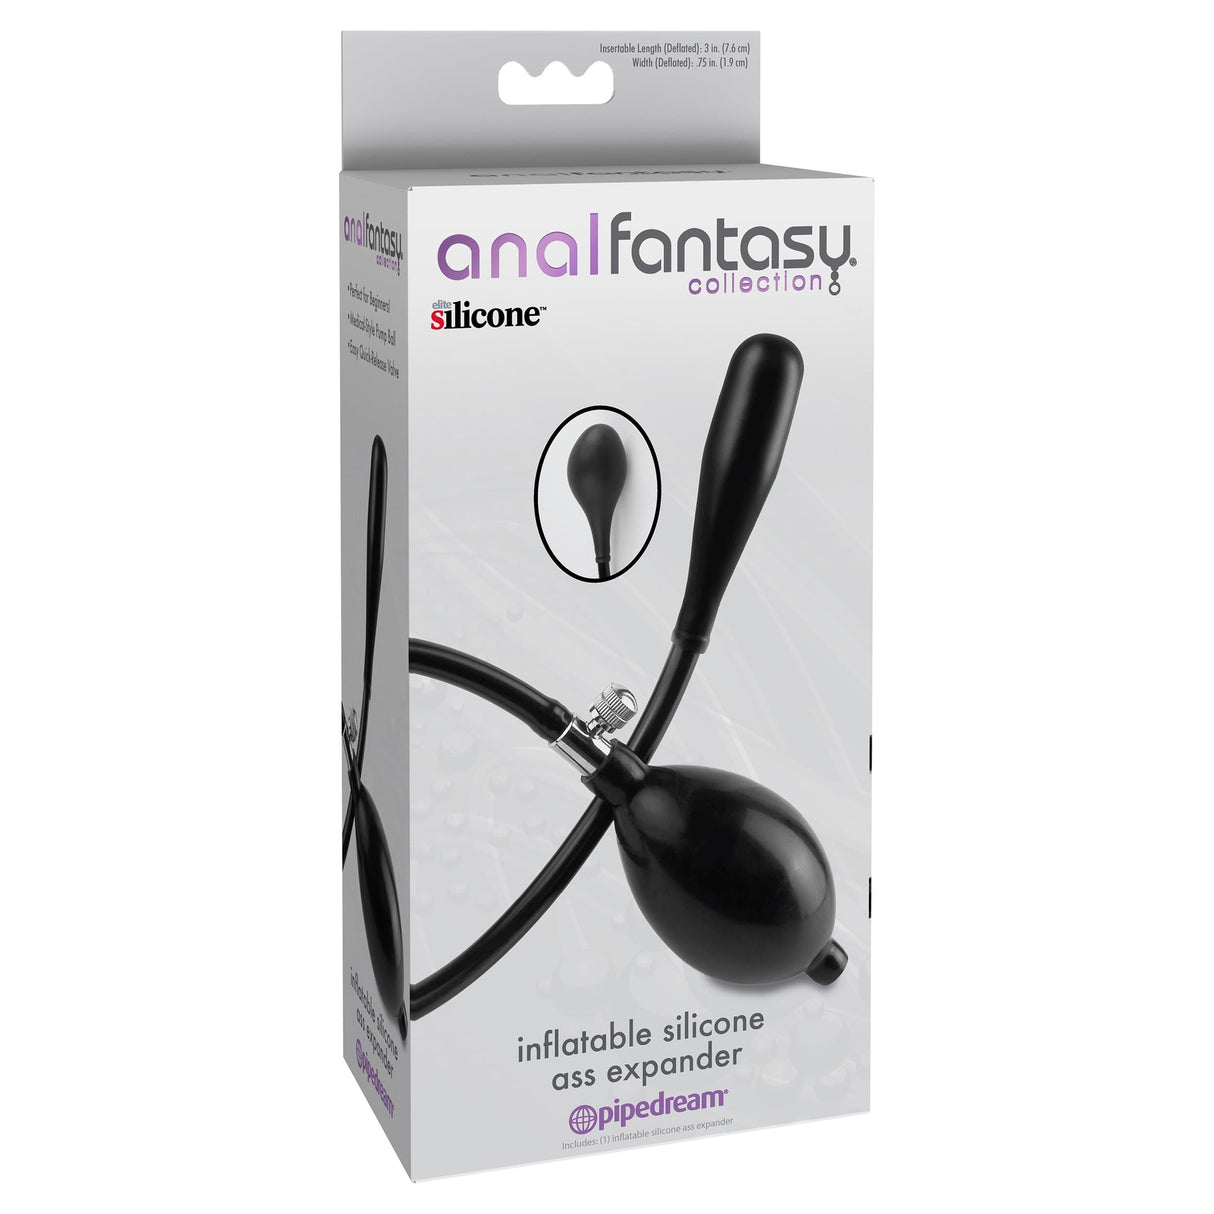 Pipedream - Anal Fantasy Collection Inflatable Silicone Ass Expander (Black) PD1260 CherryAffairs